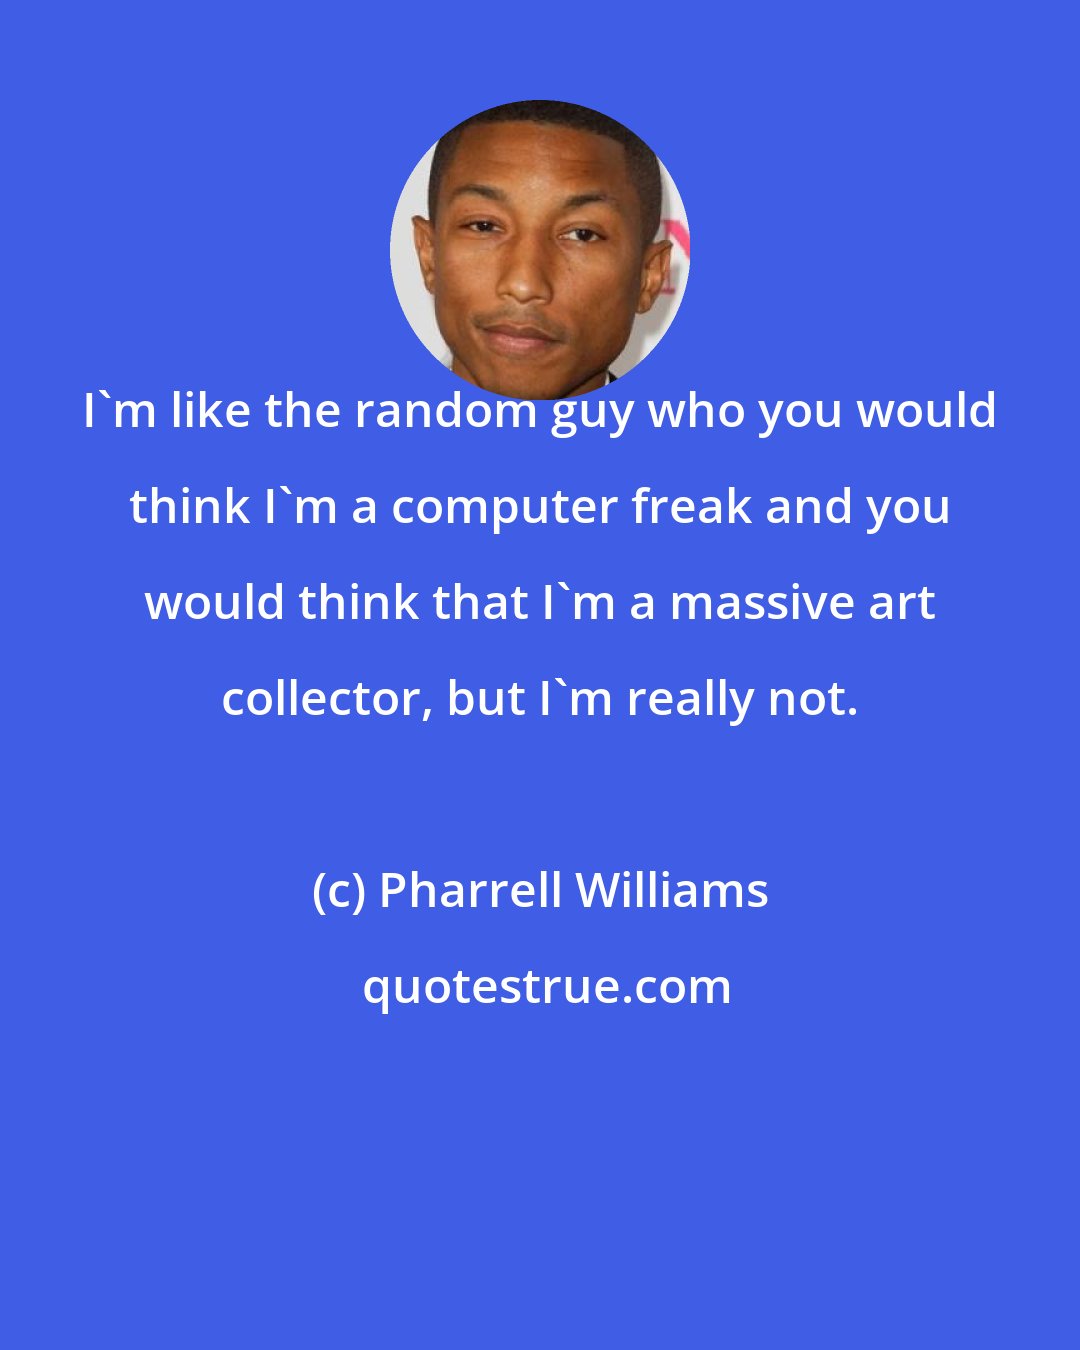 Pharrell Williams: I'm like the random guy who you would think I'm a computer freak and you would think that I'm a massive art collector, but I'm really not.